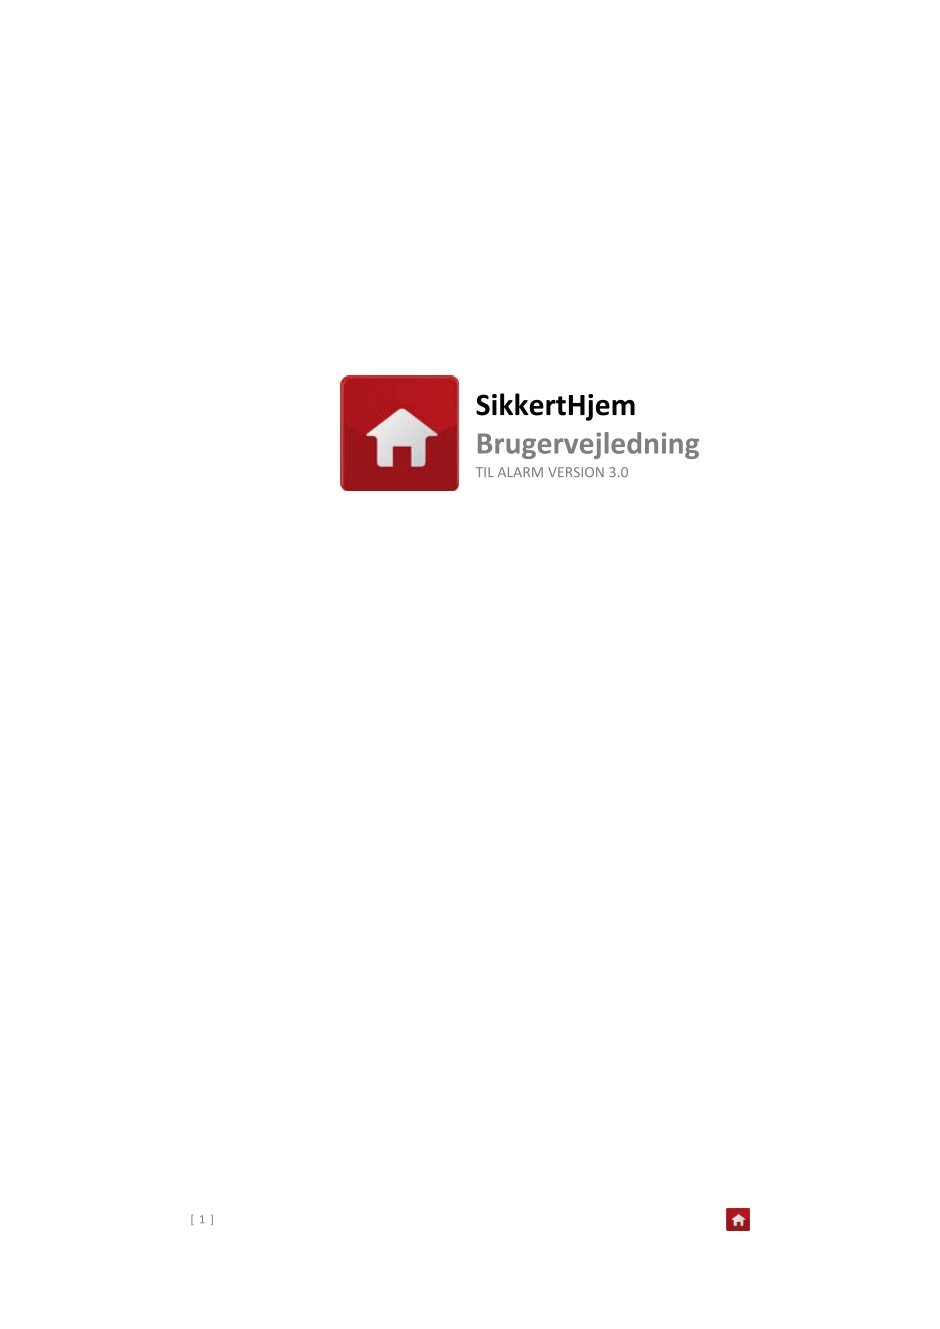 4 free Magazines from SIKKERTHJEM.DK